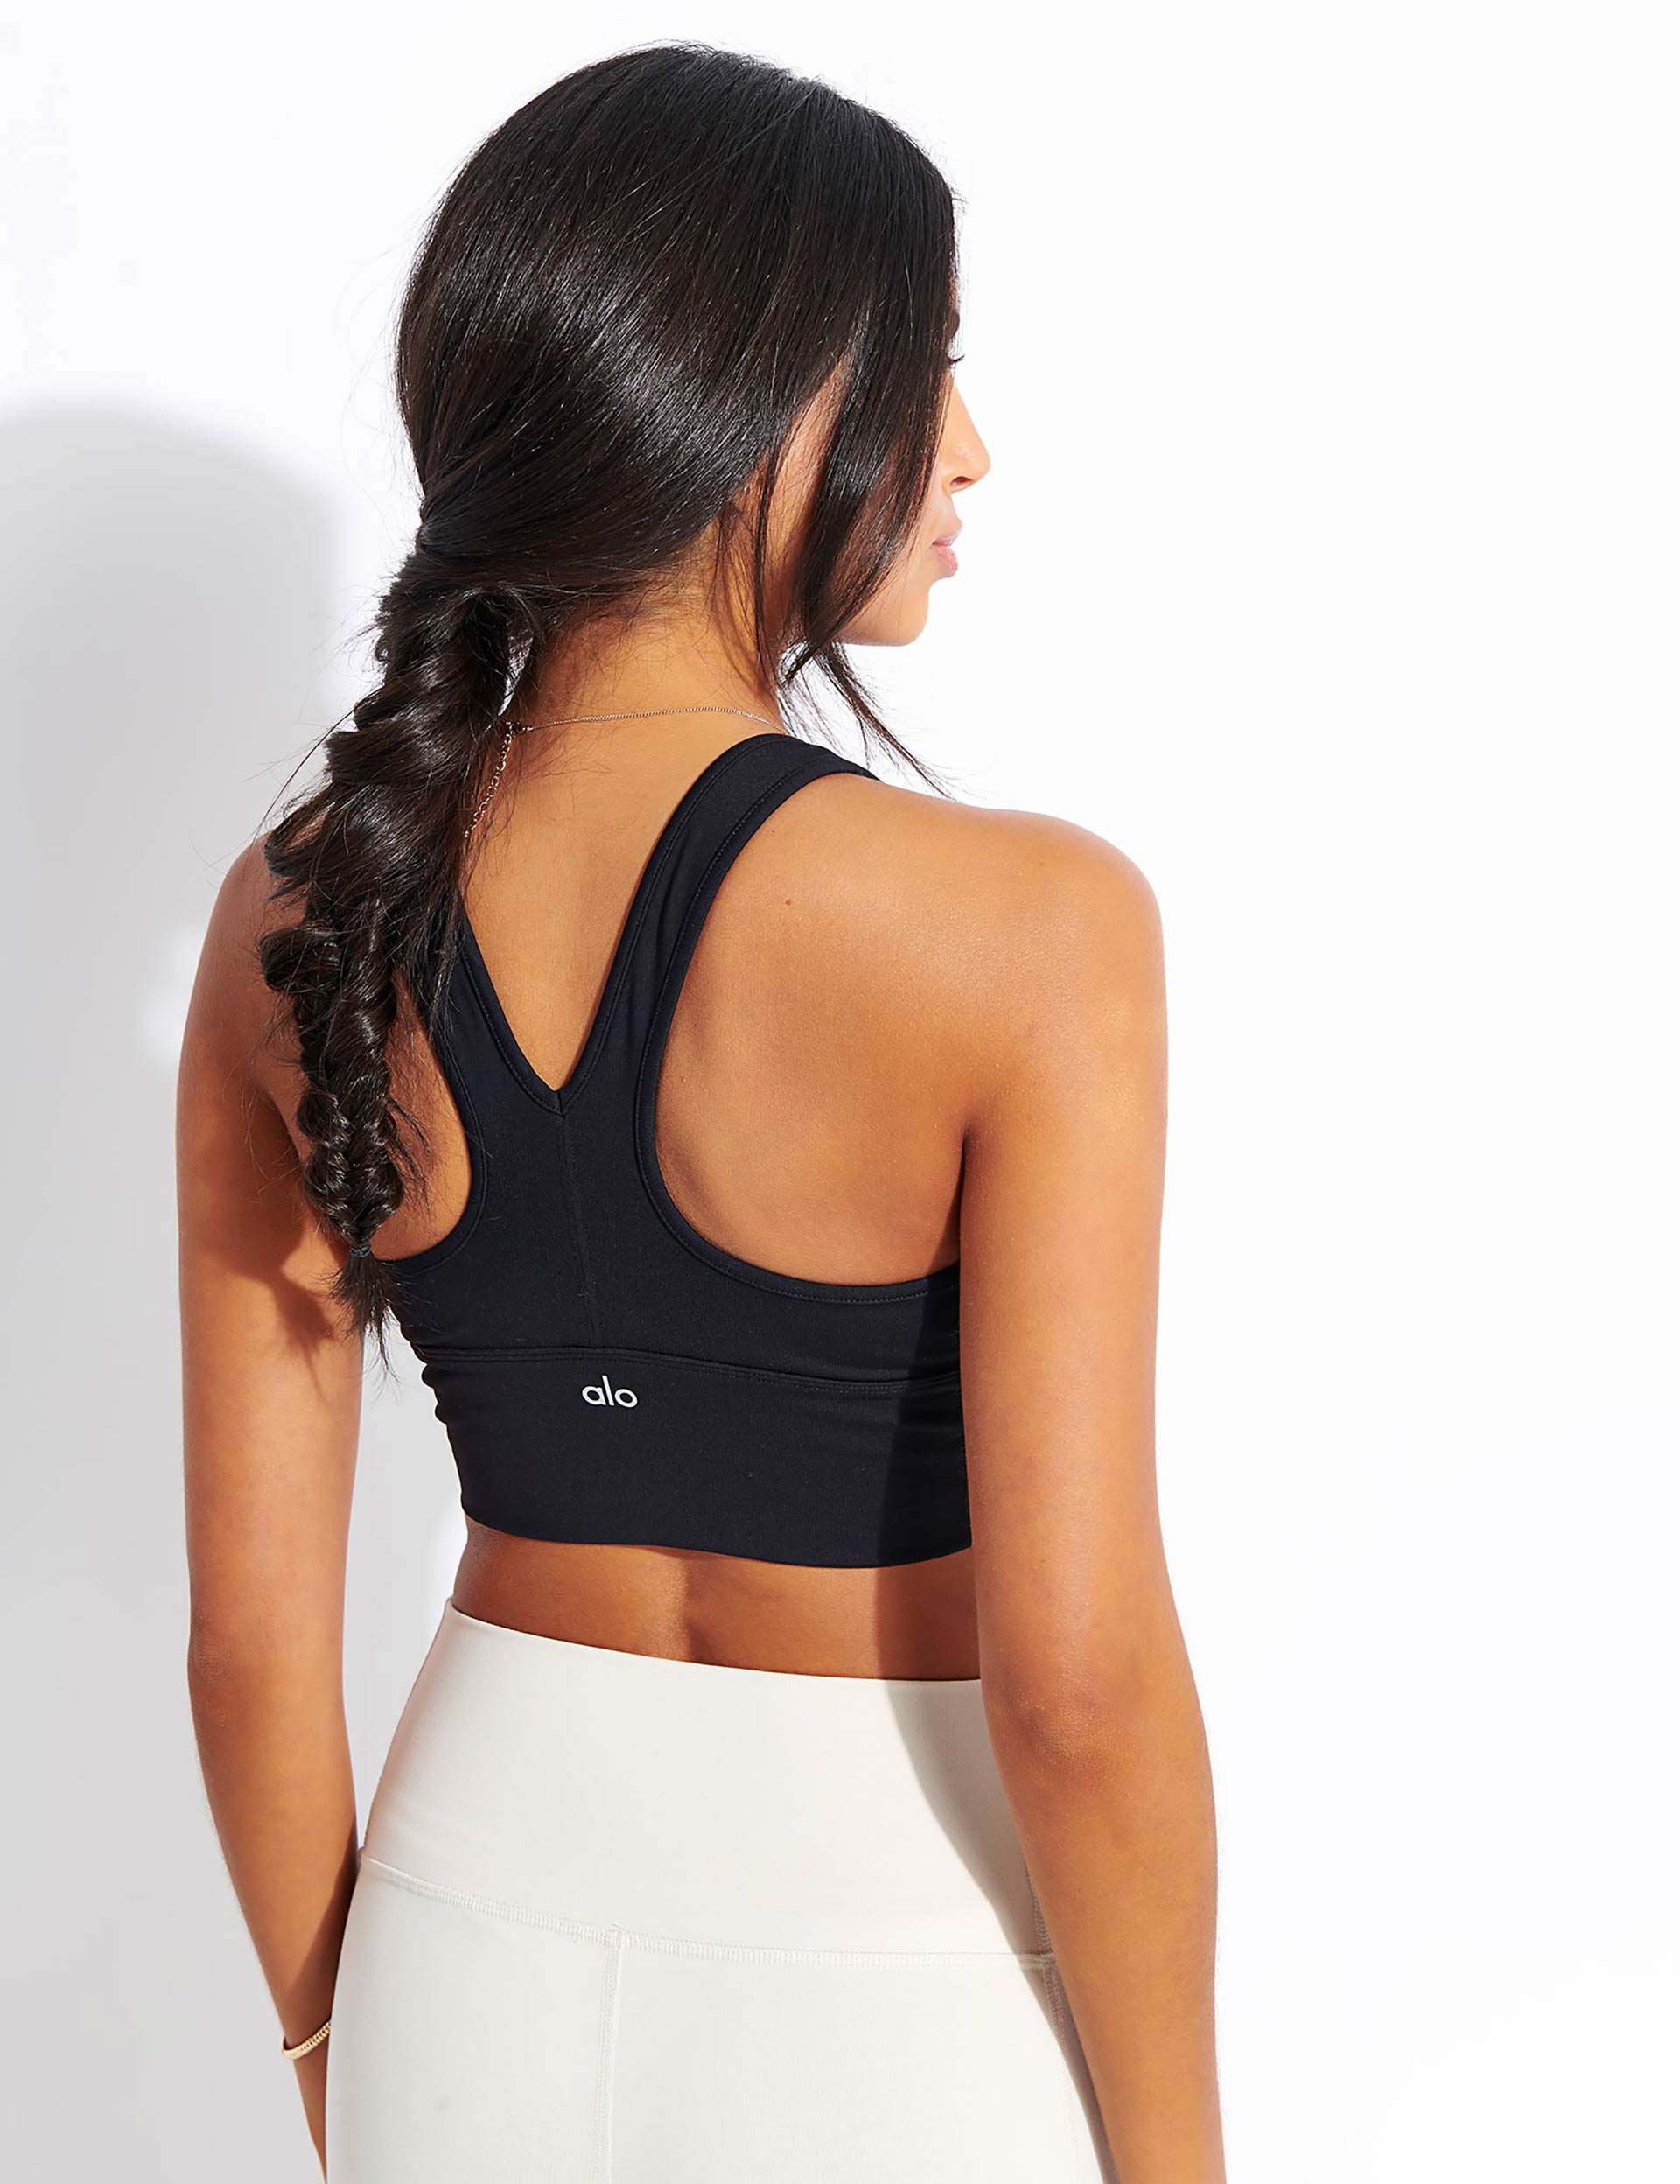 Everyday Yoga Delight Tribe Racer Back Sports Bra at YogaOutlet